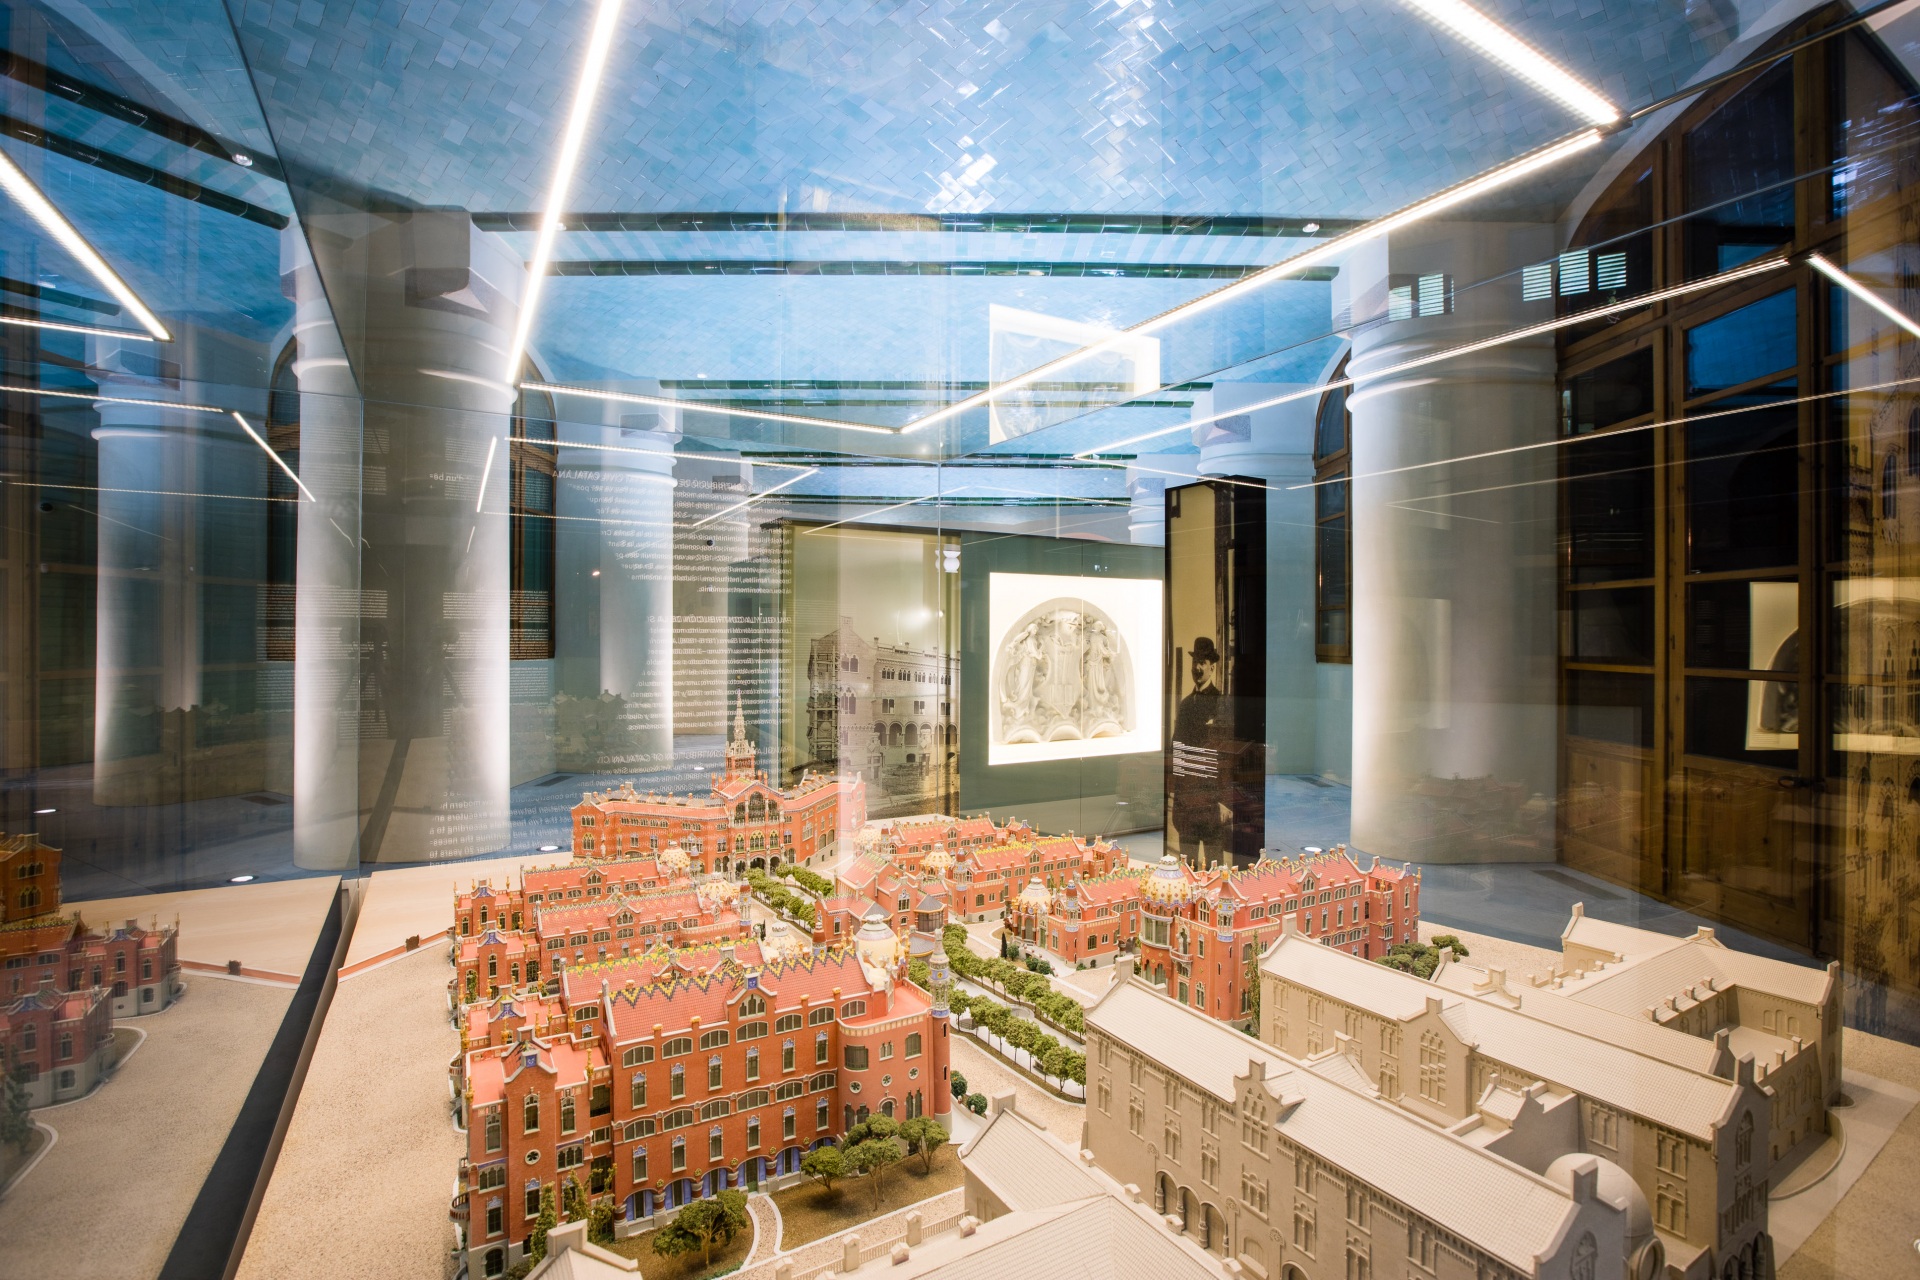 Hospital of the Santa Creu i Sant Pau. Picture of the showcase interior showing the modernist building model. The reflection duplicates the image. 